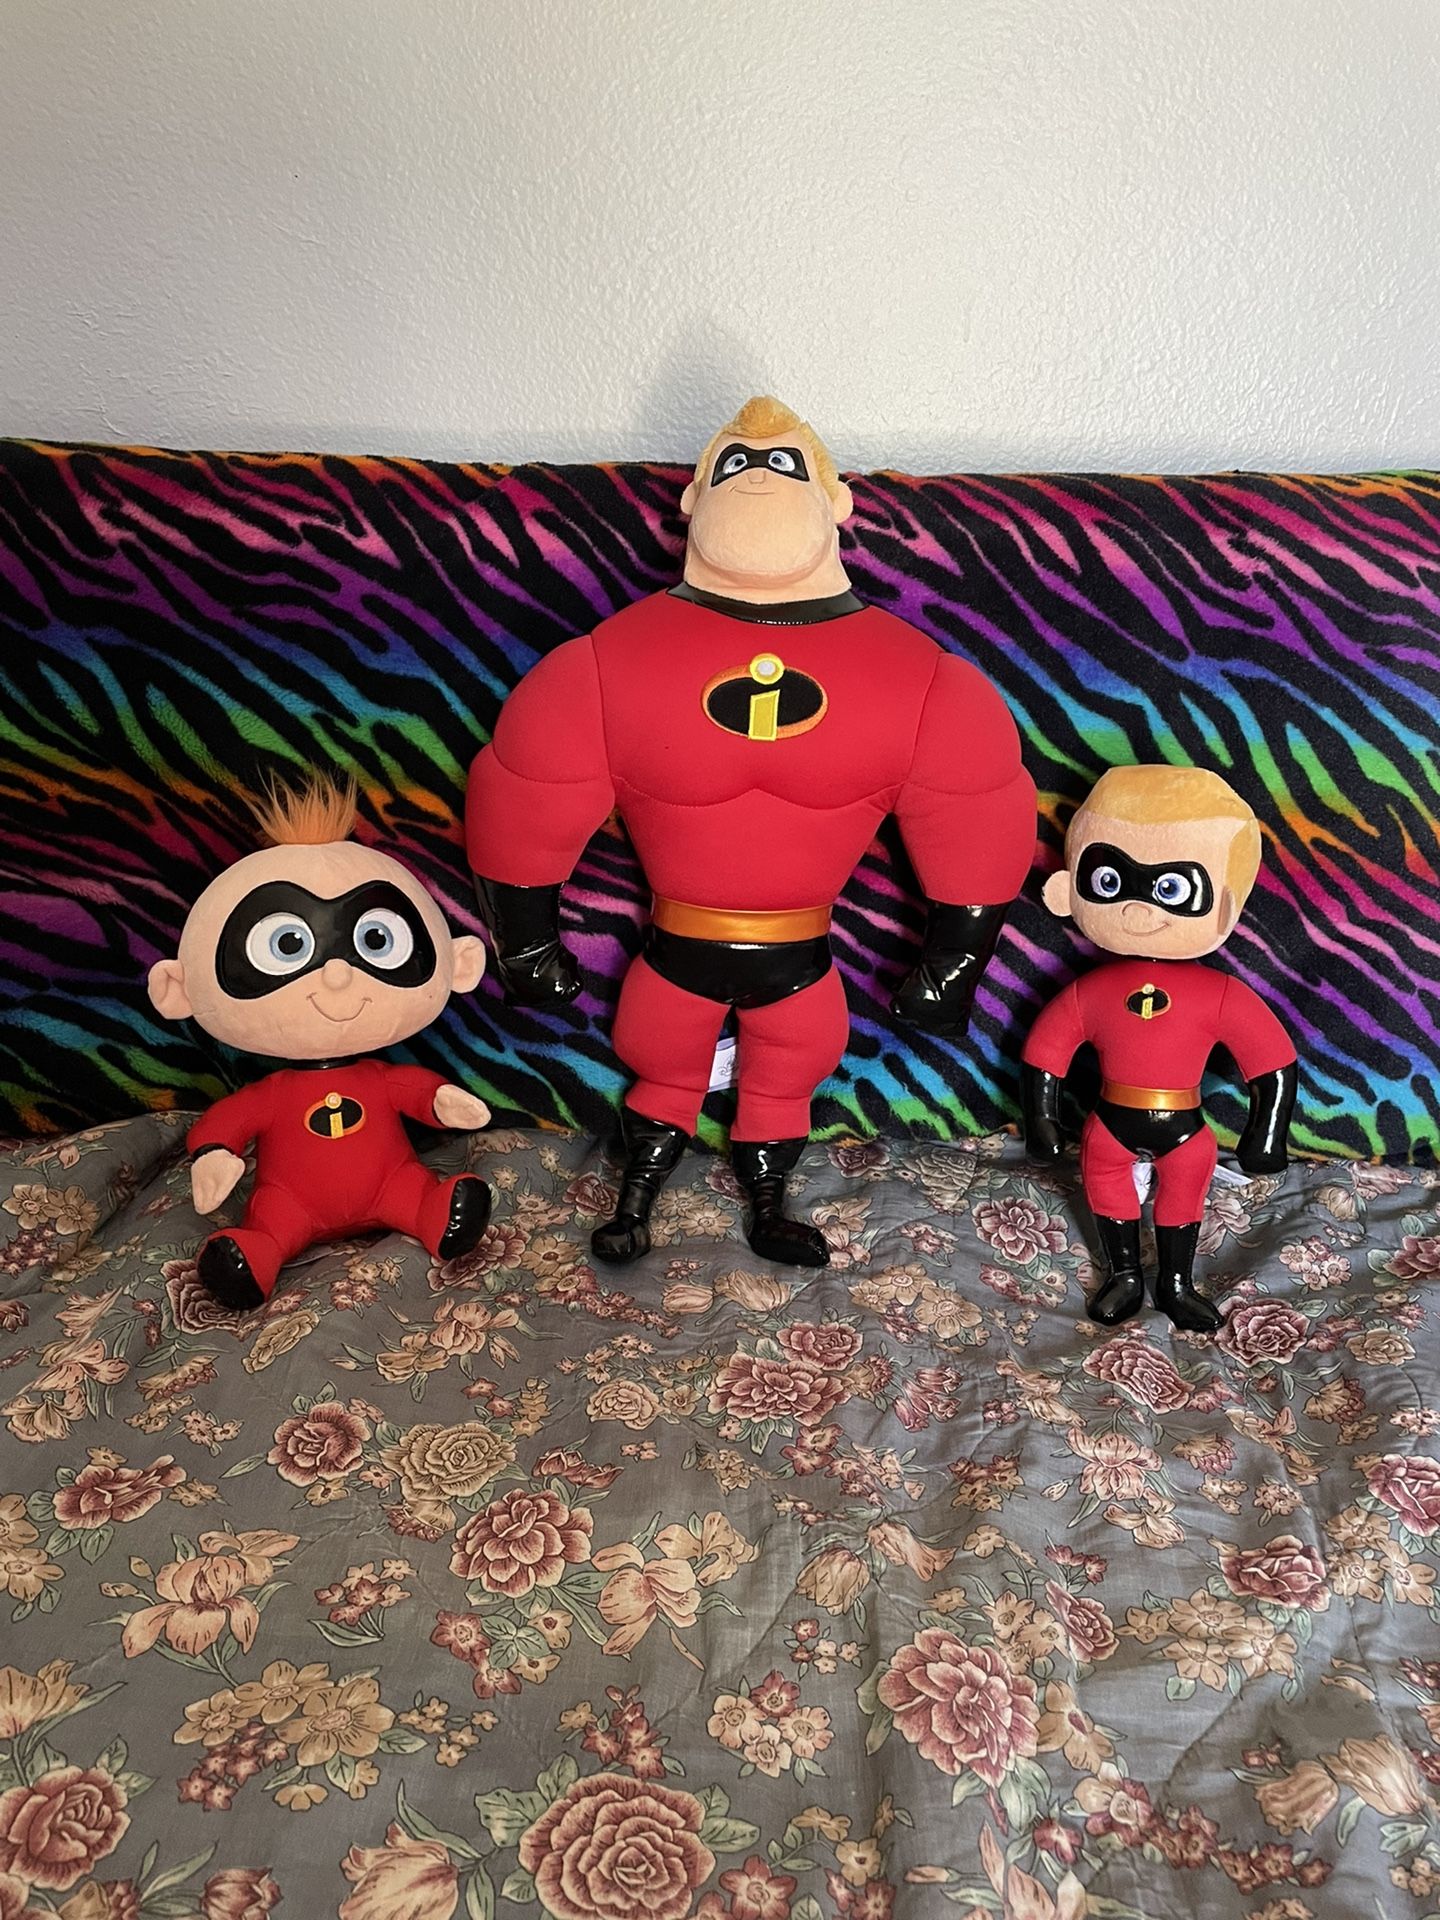 The Incredibles Plush Toy Figures